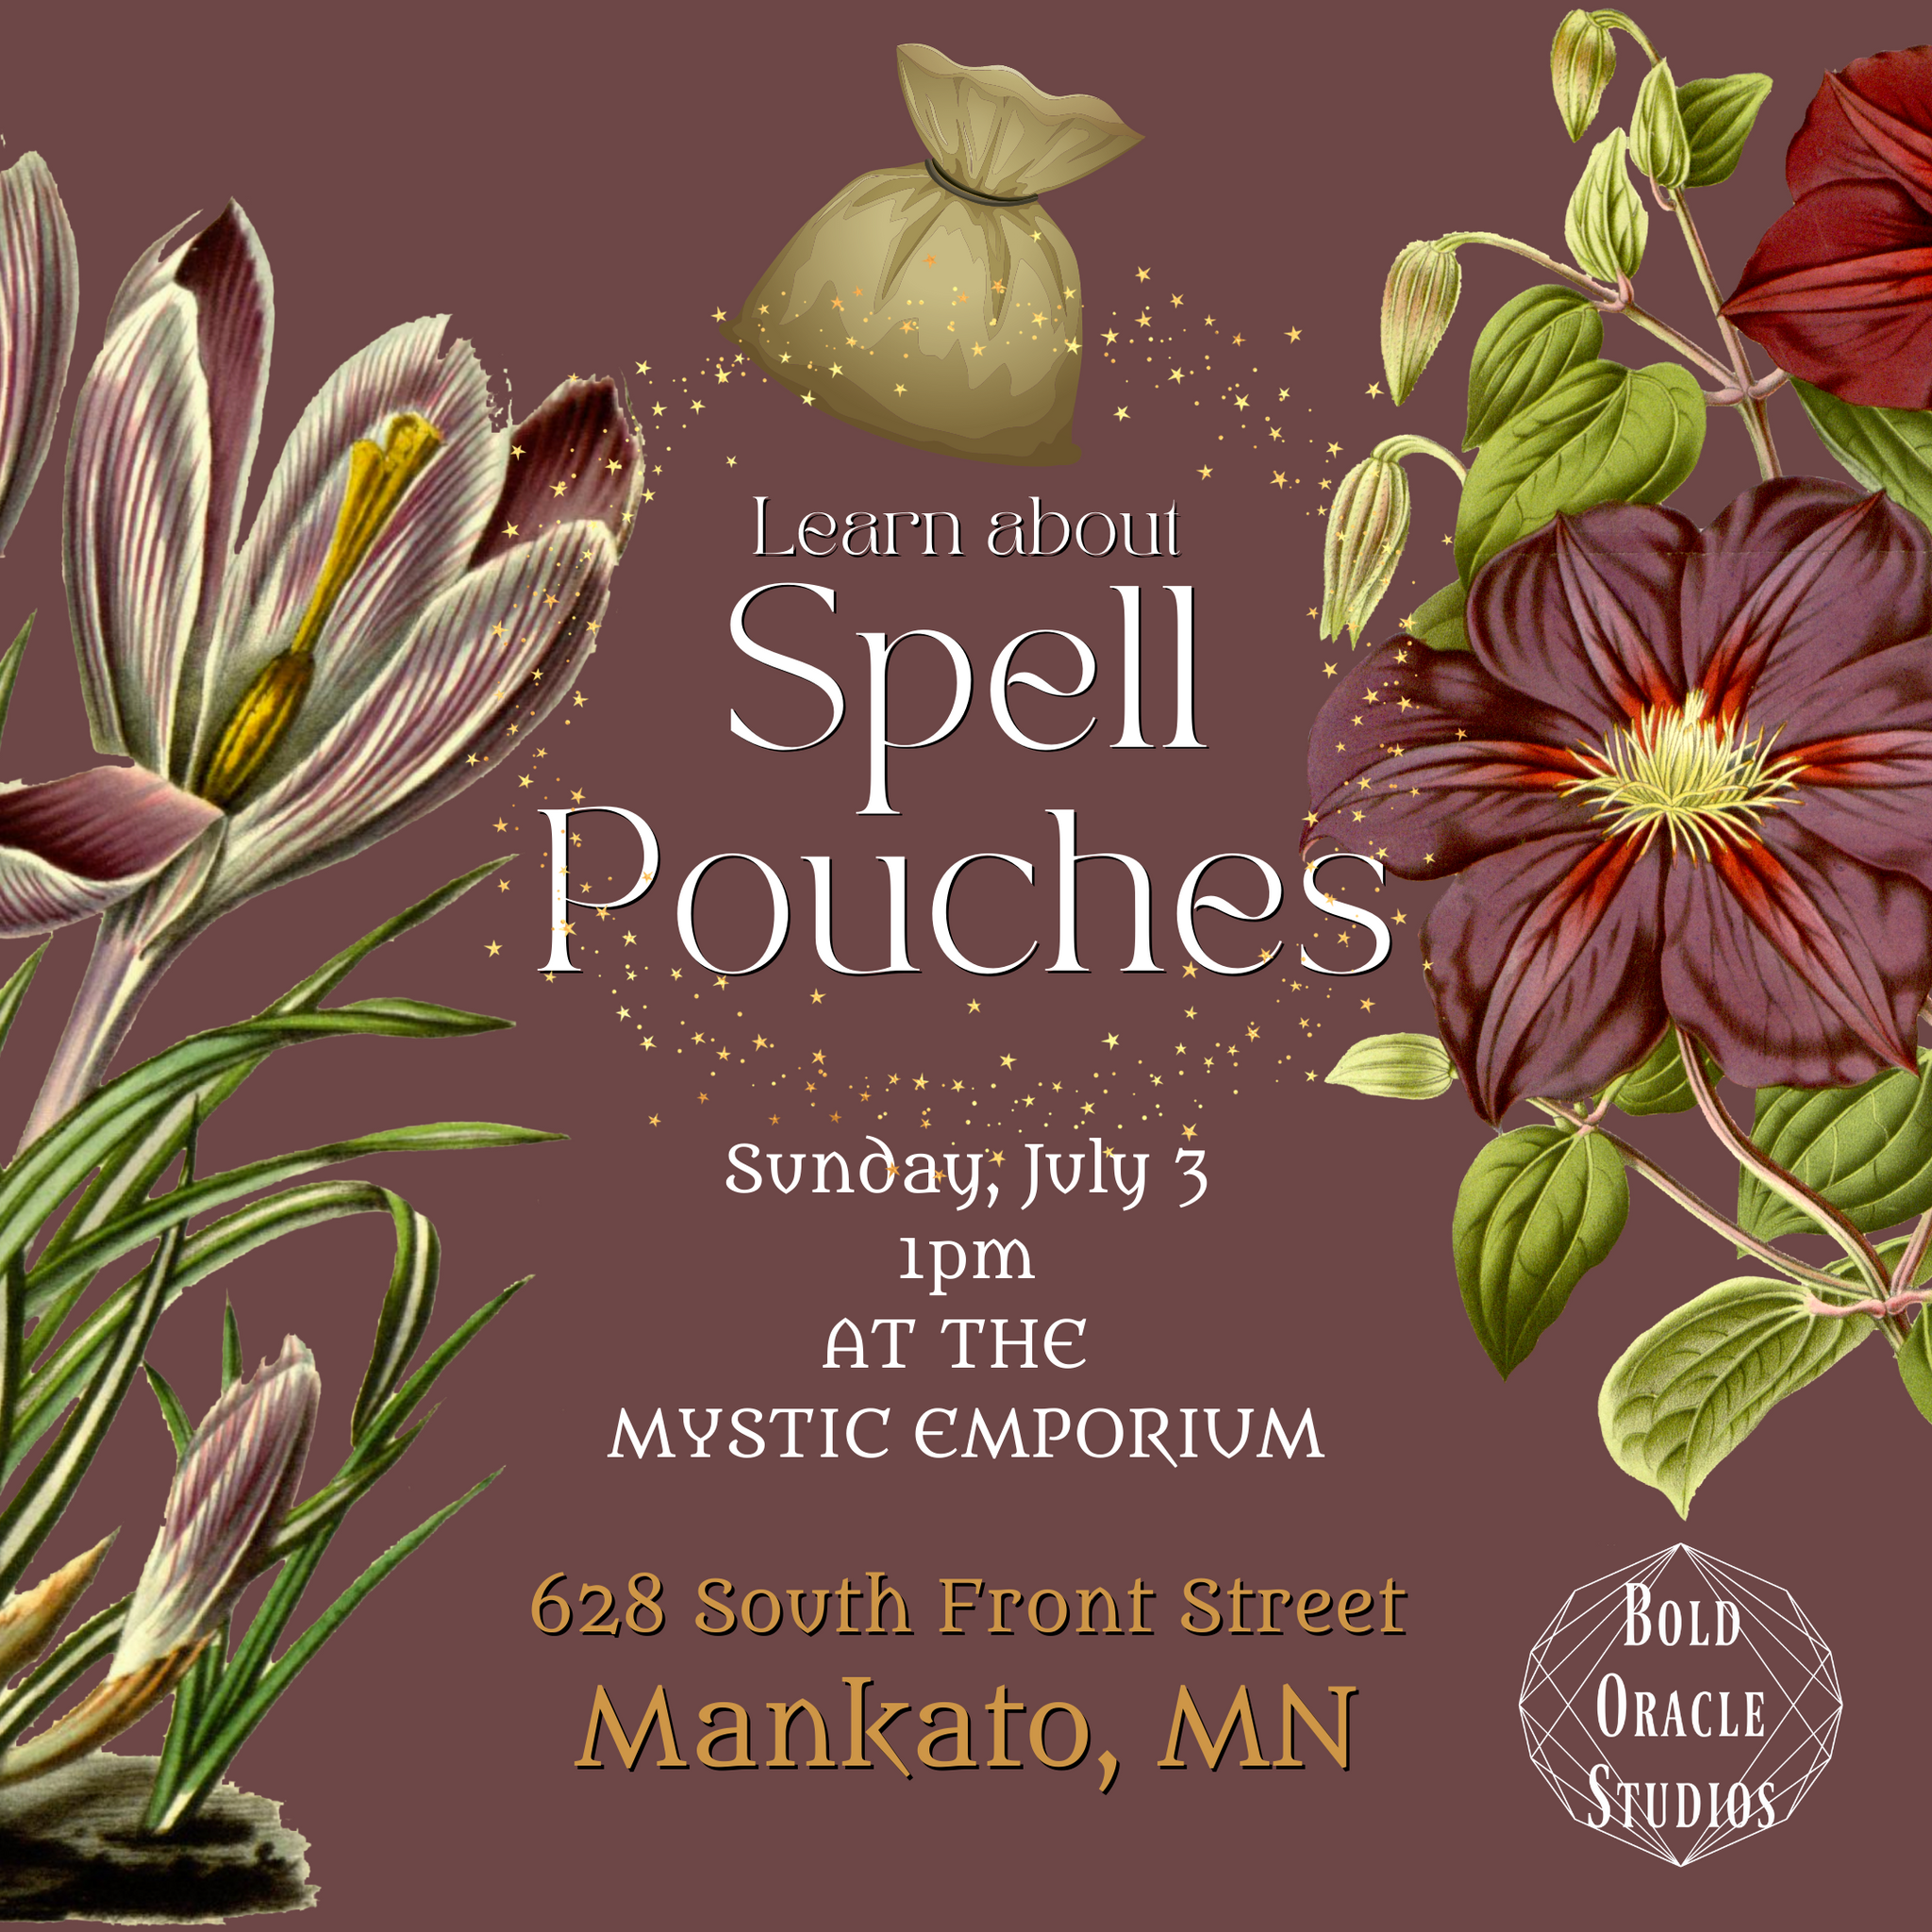 Spell Pouch Workshop